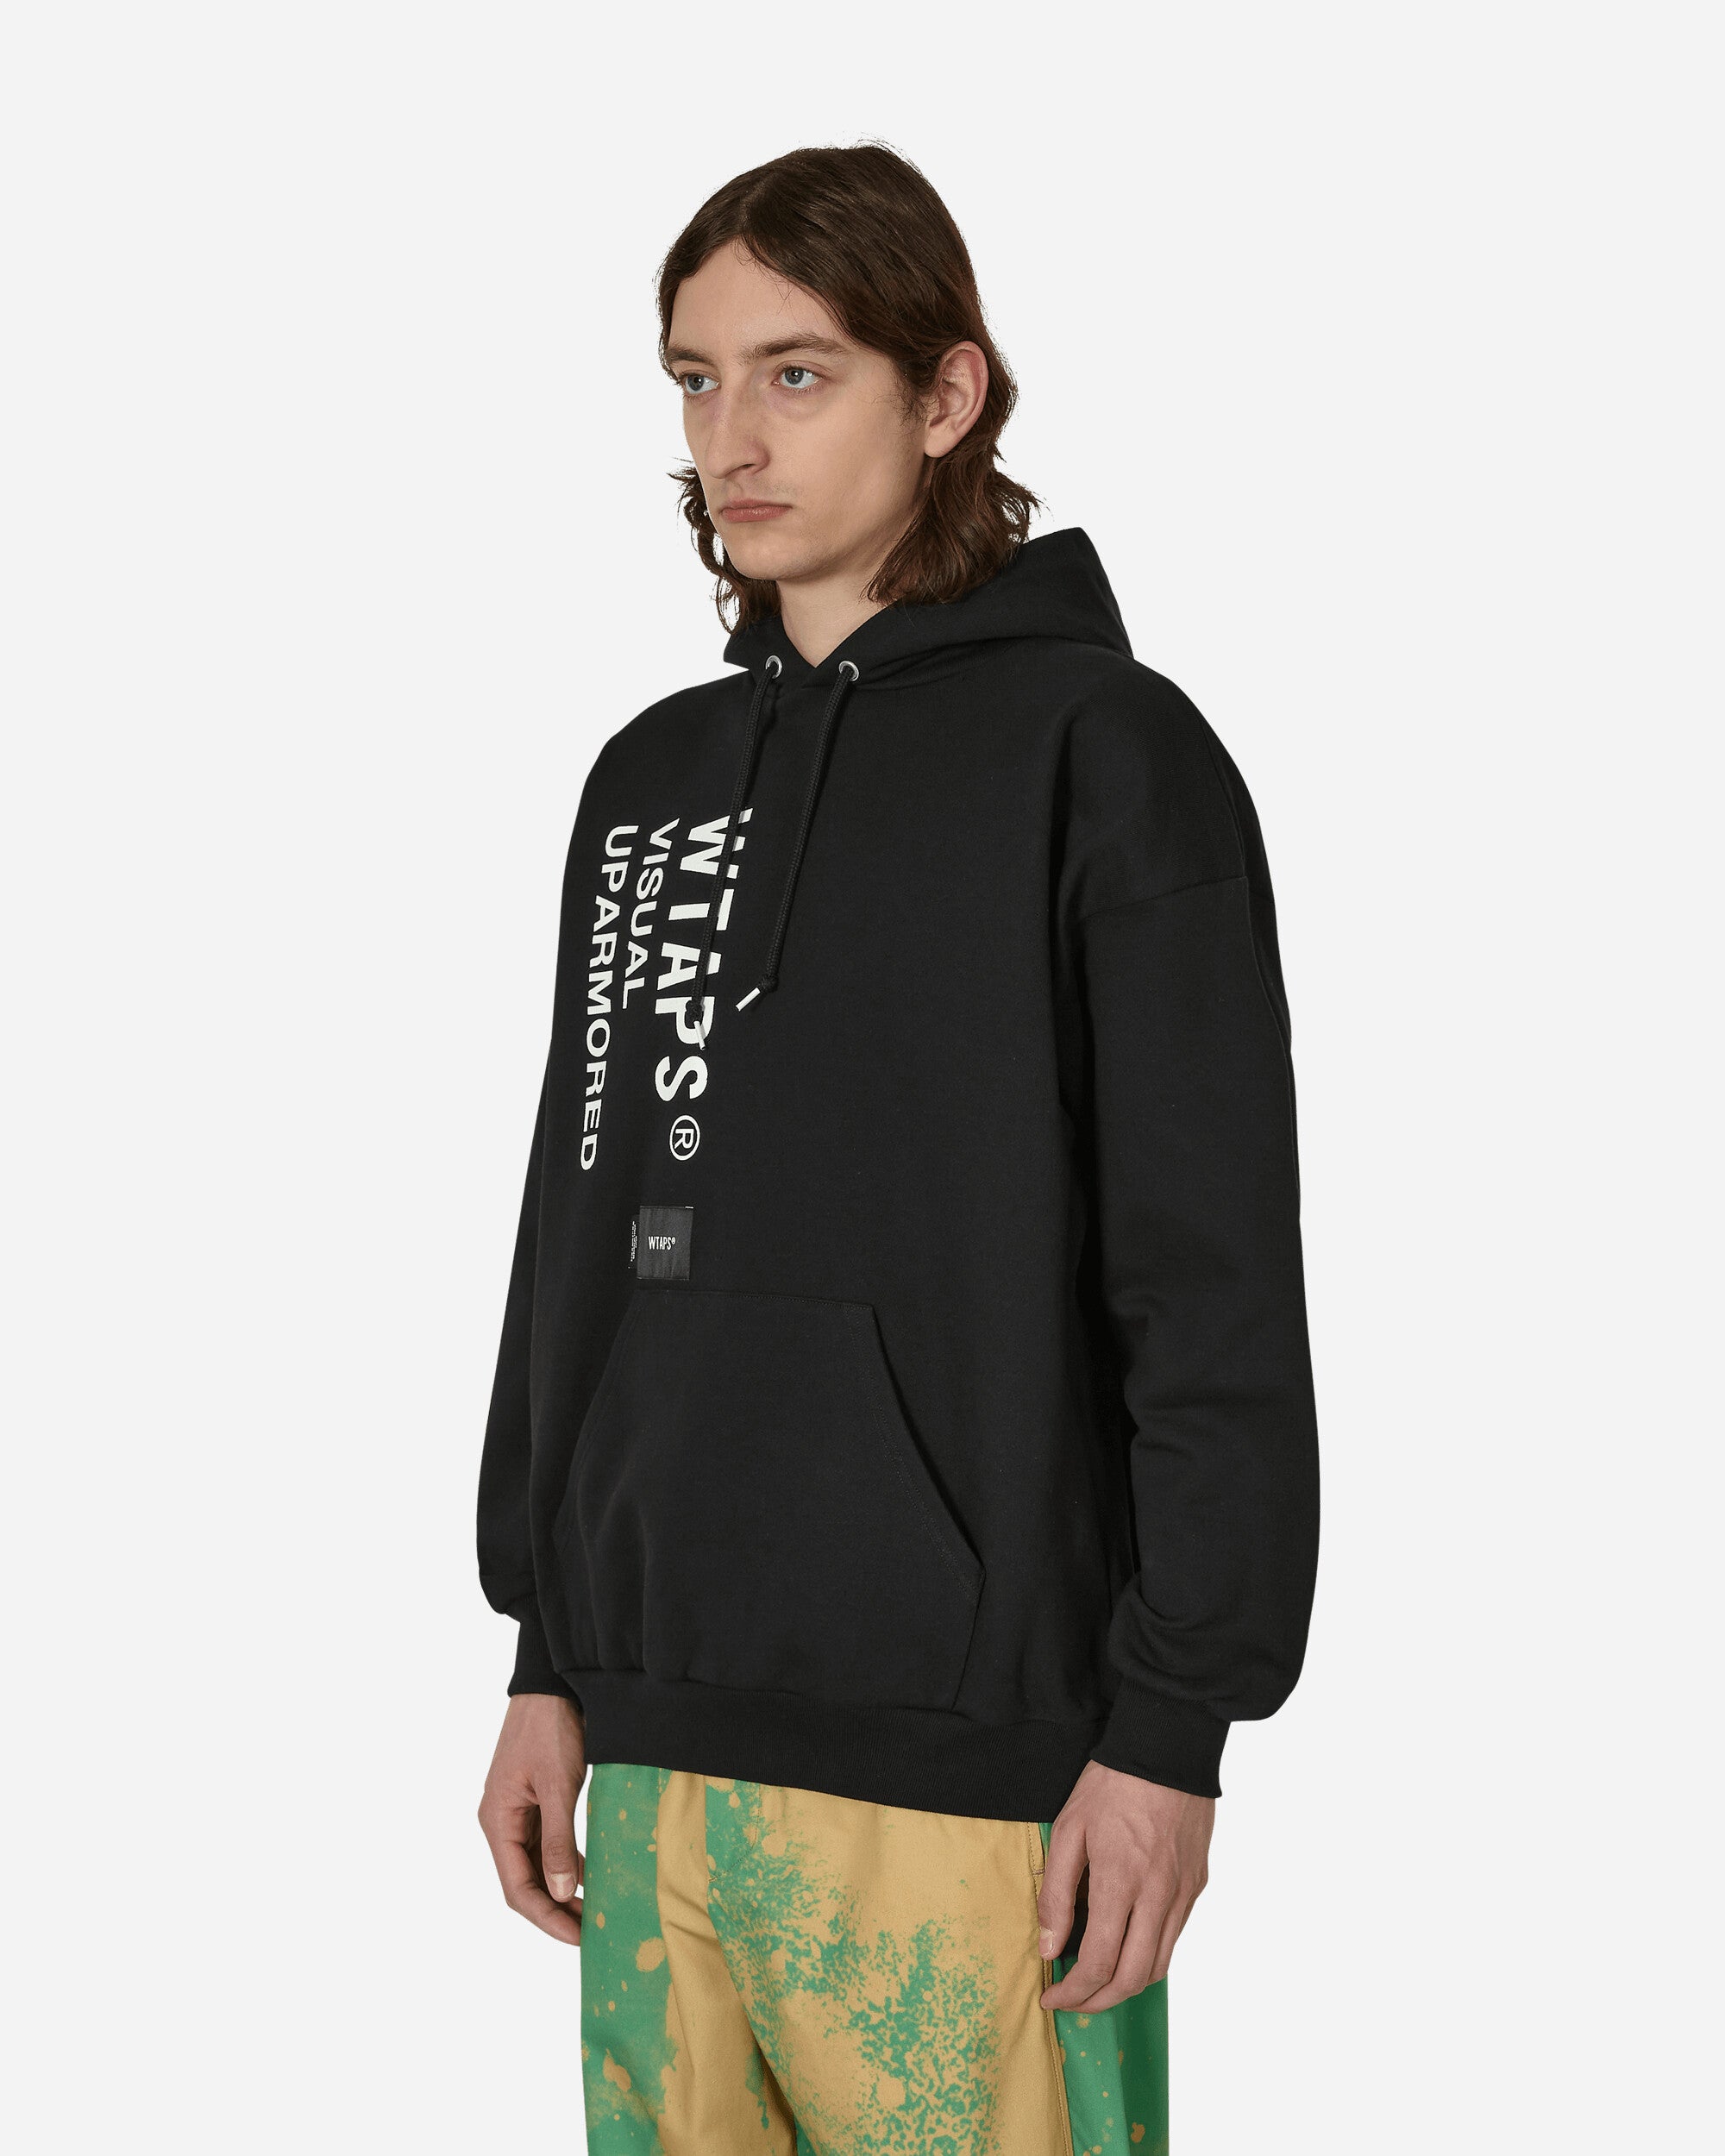 WTAPS VISUAL UPARMORED HOODY COTTON BLK-